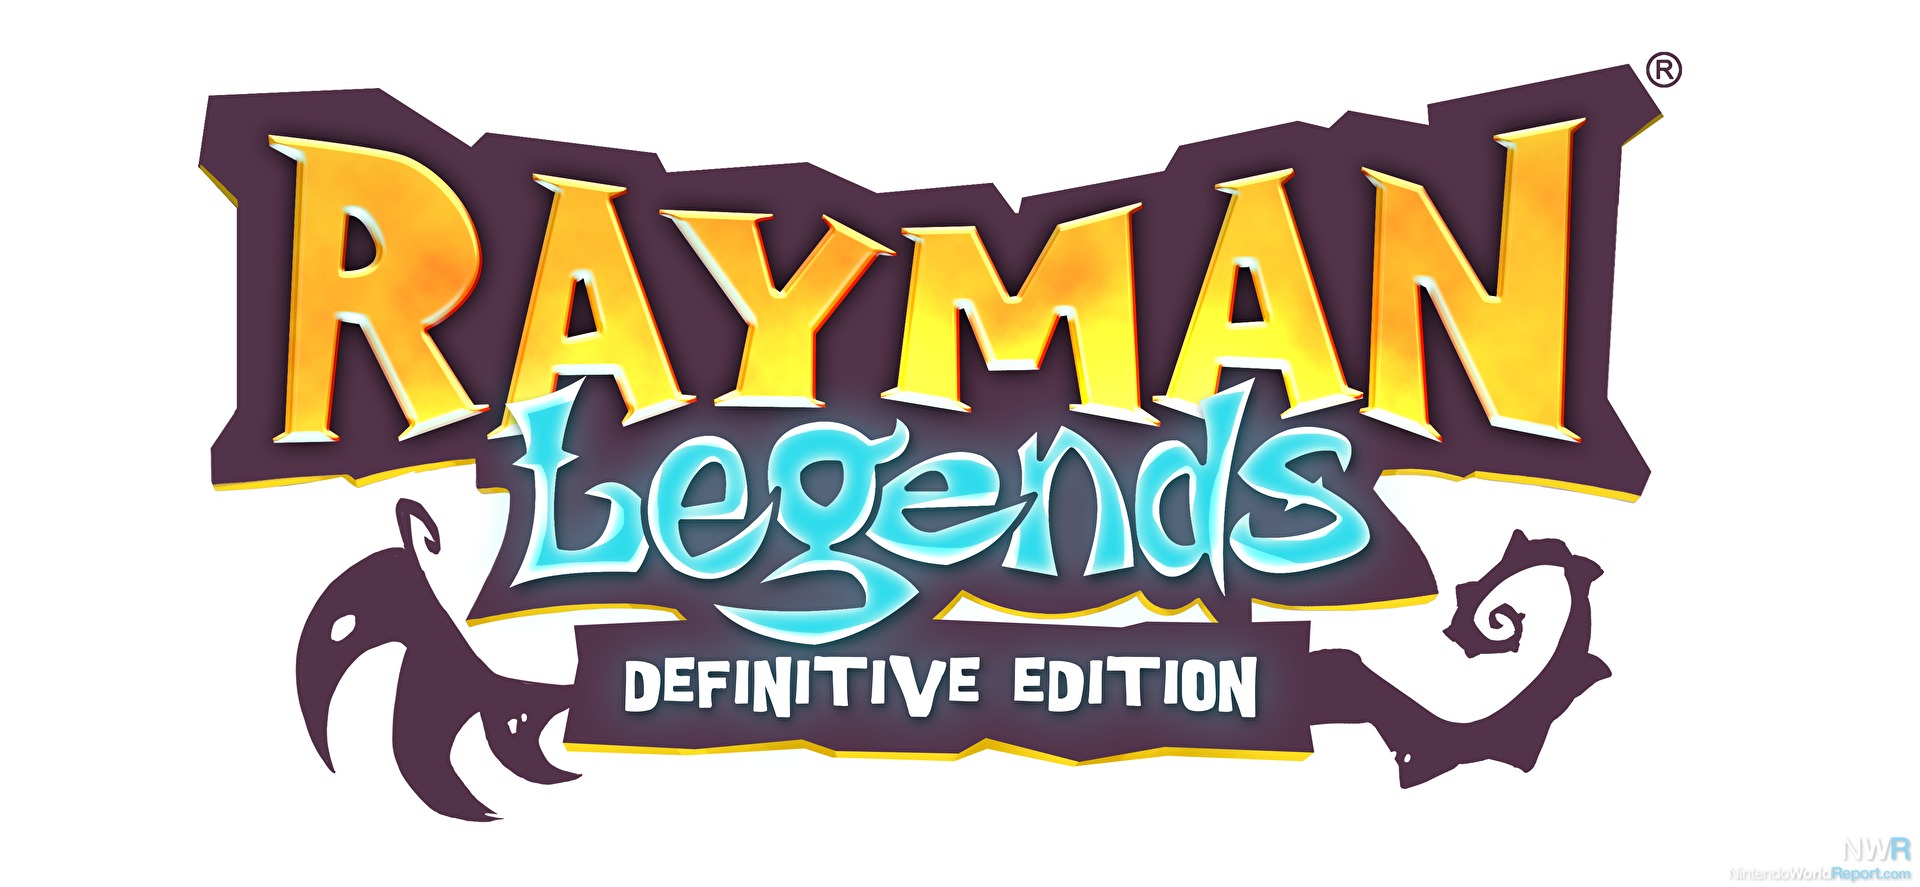 Rayman Legends: Definitive Edition Review - Review - Nintendo World Report